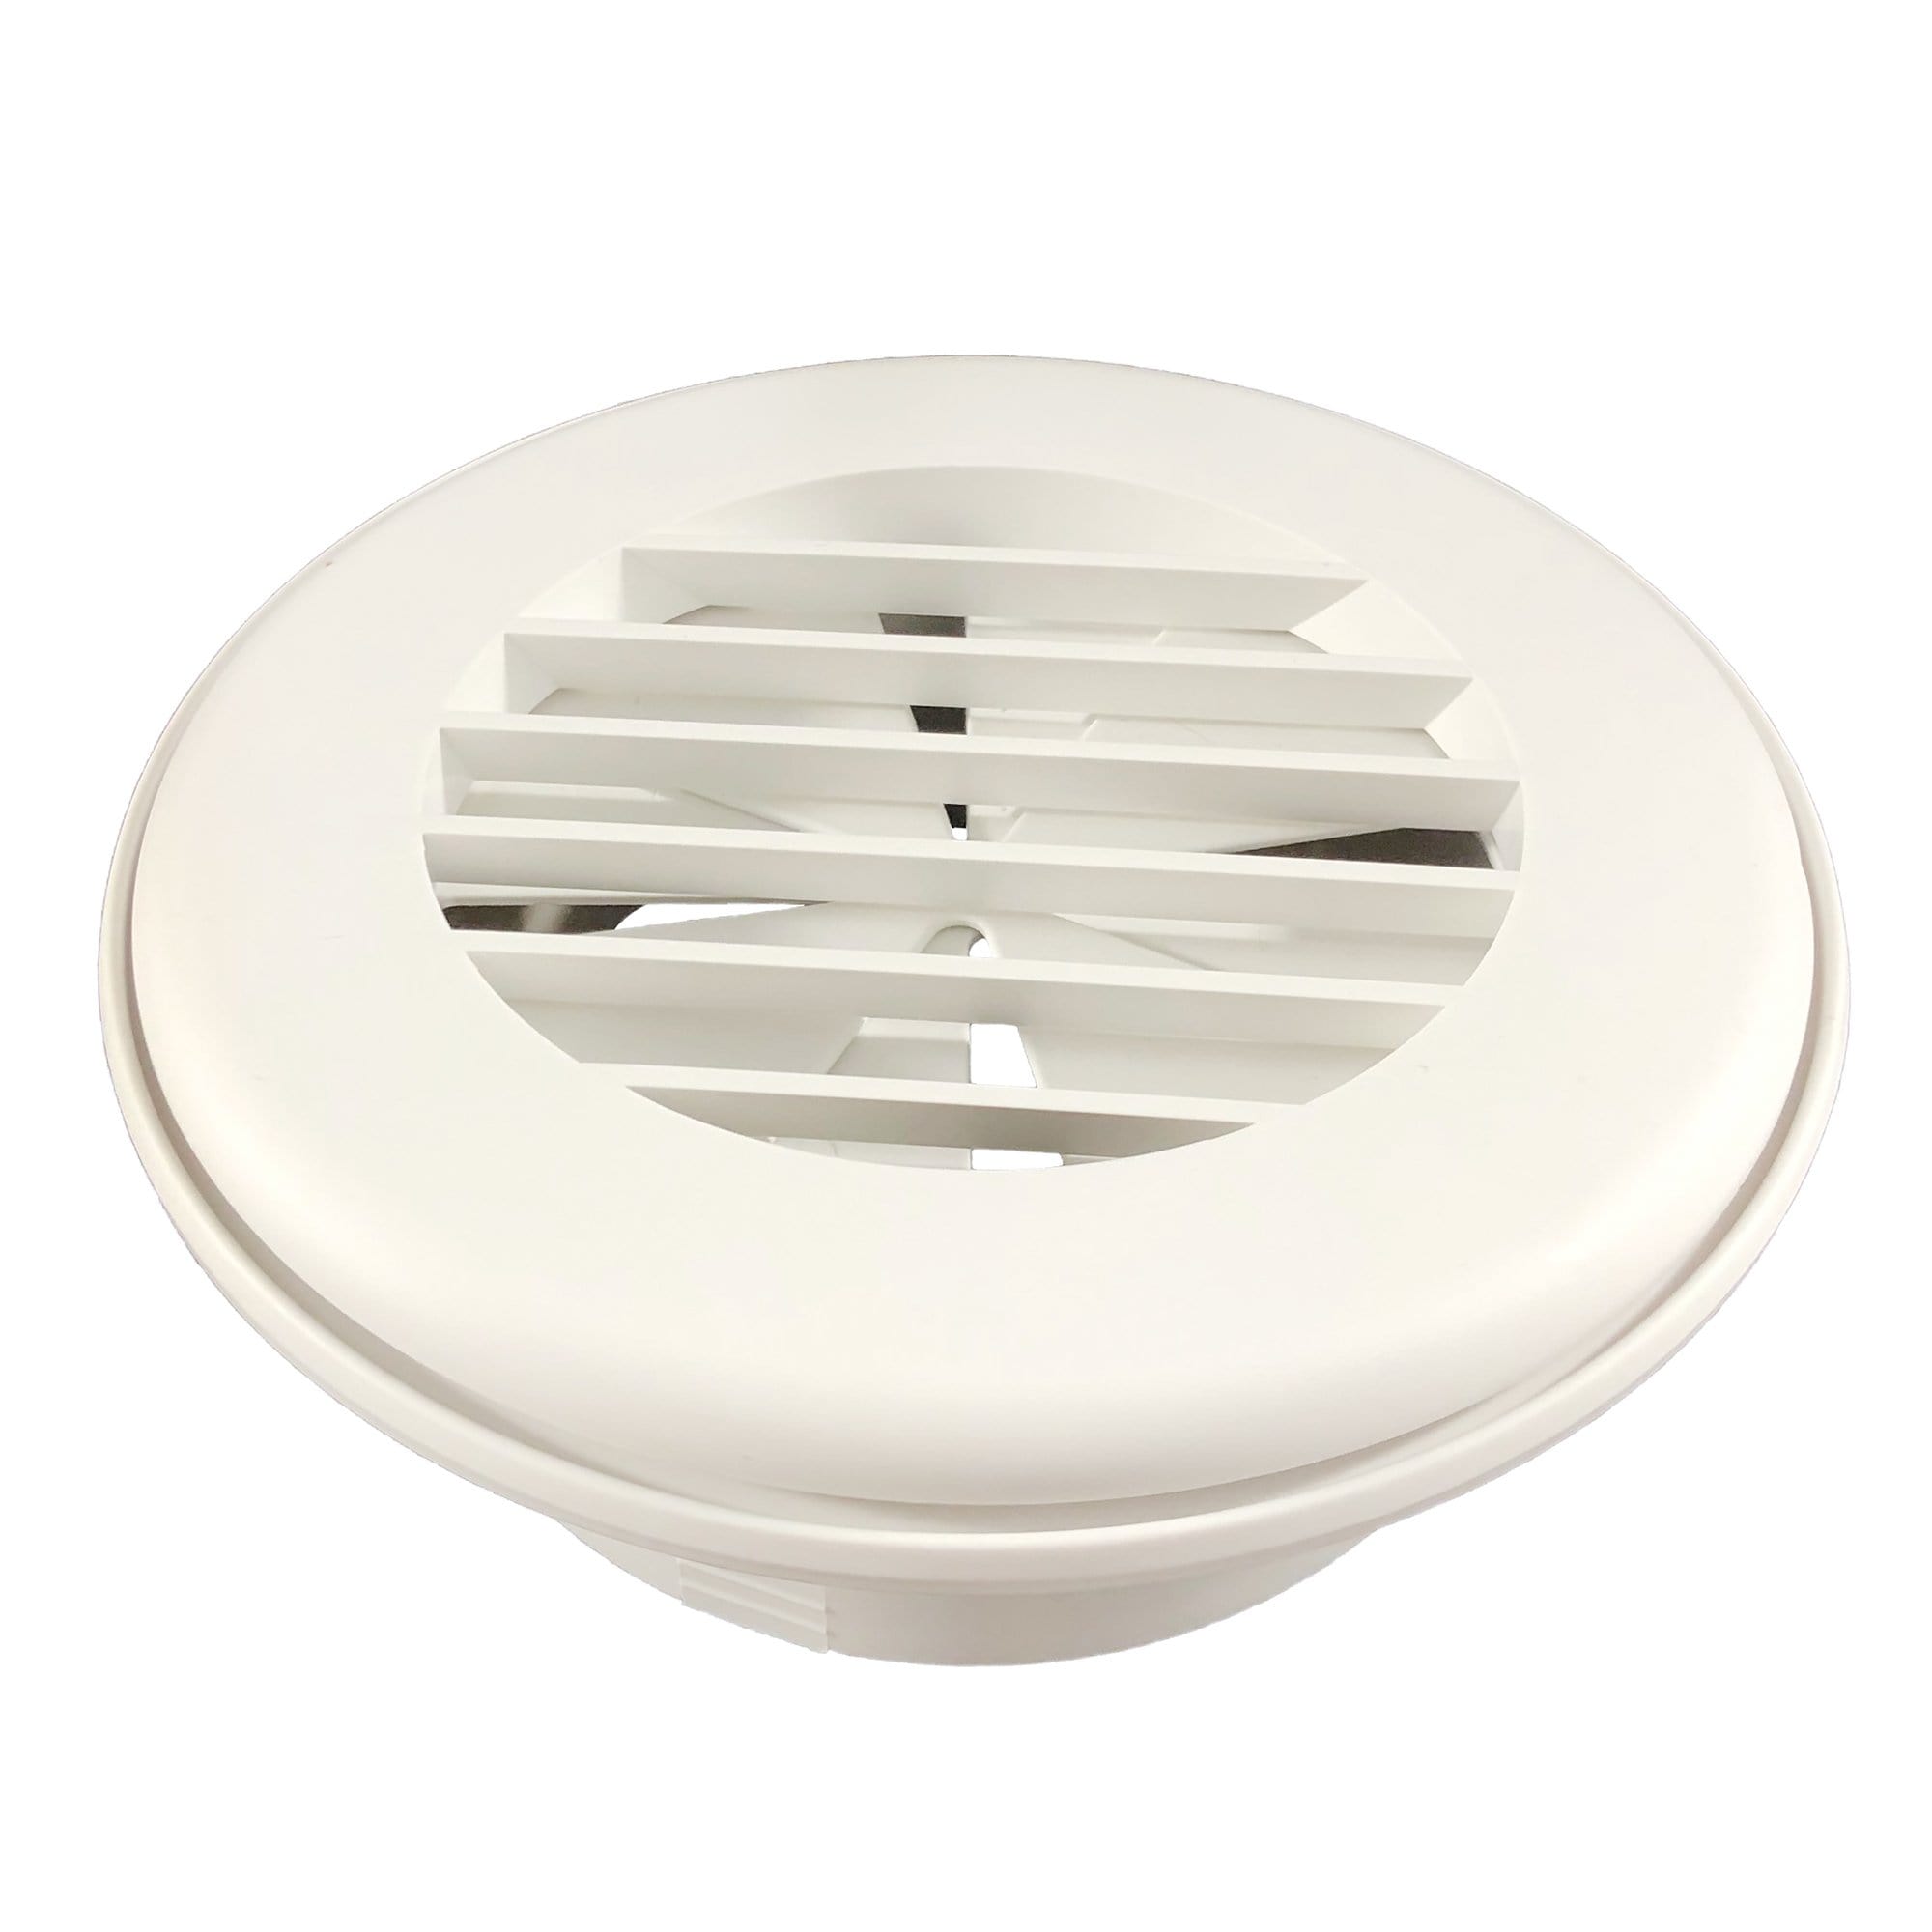 Thetford 94267 (601-015-94267) B&B Molders 4" Thermovent Ducted Heat Vent W/ Damper, Polar White